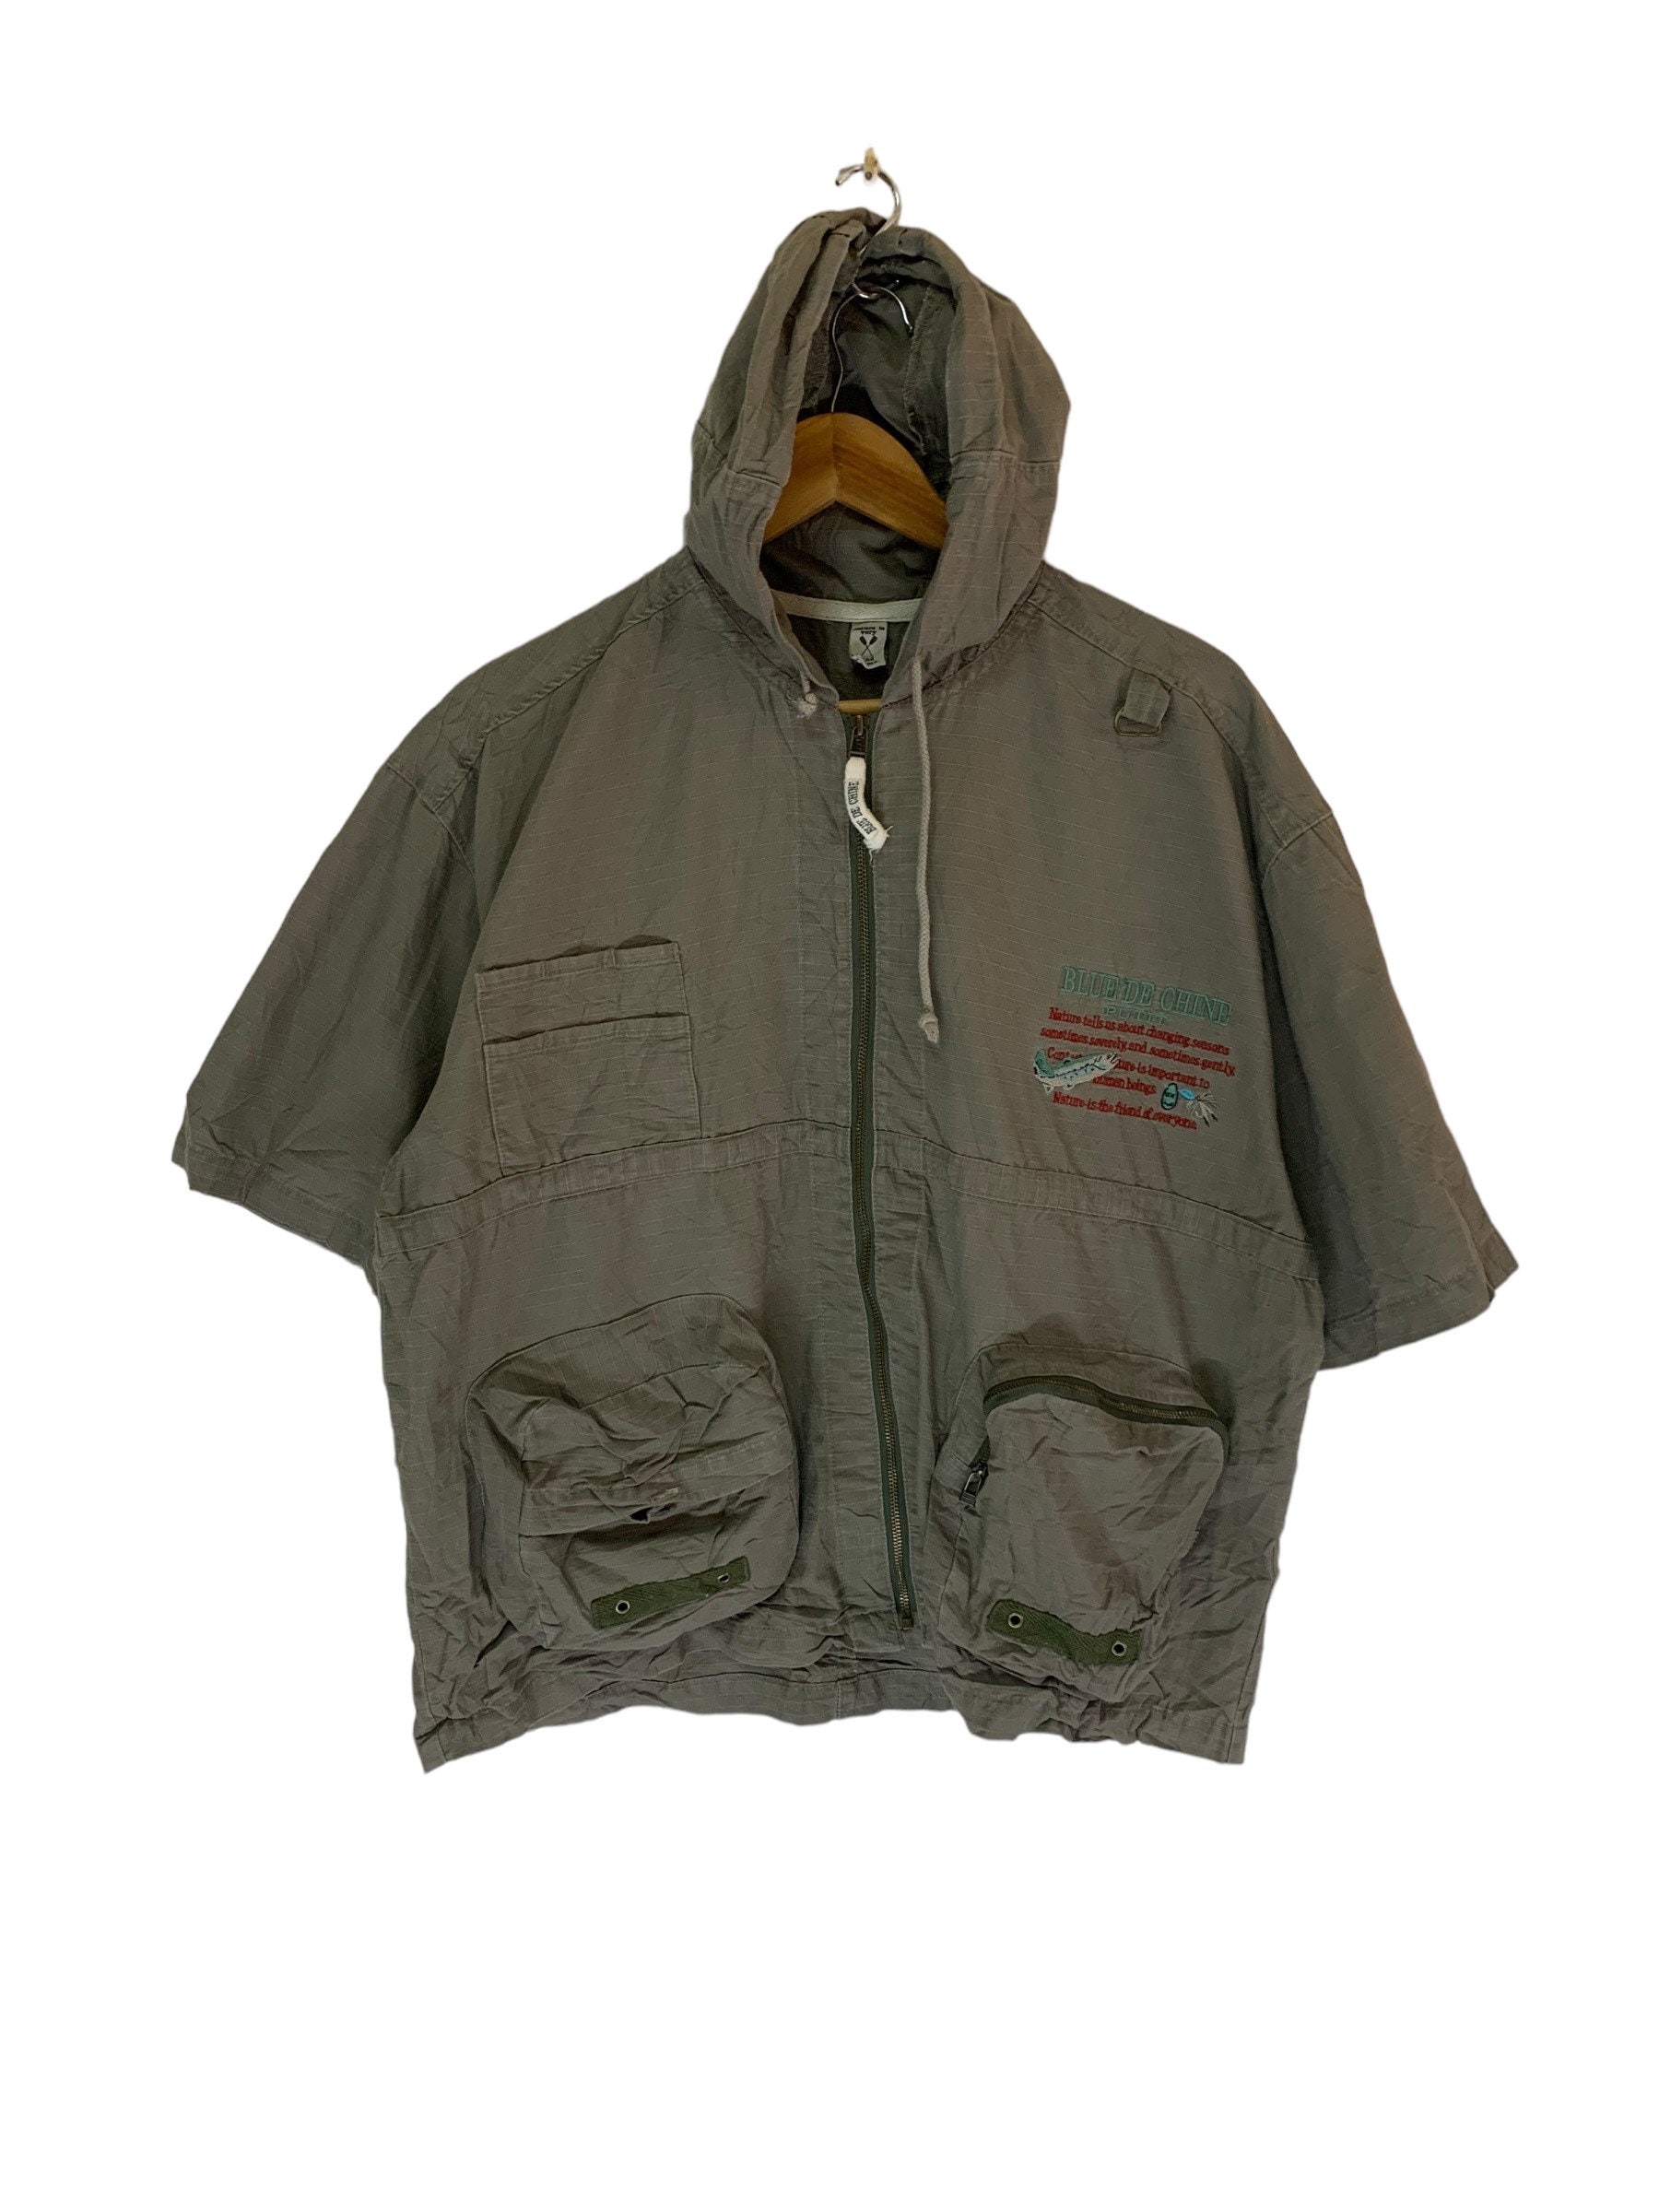 Buy Fly Fishing Jacket Online In India -  India